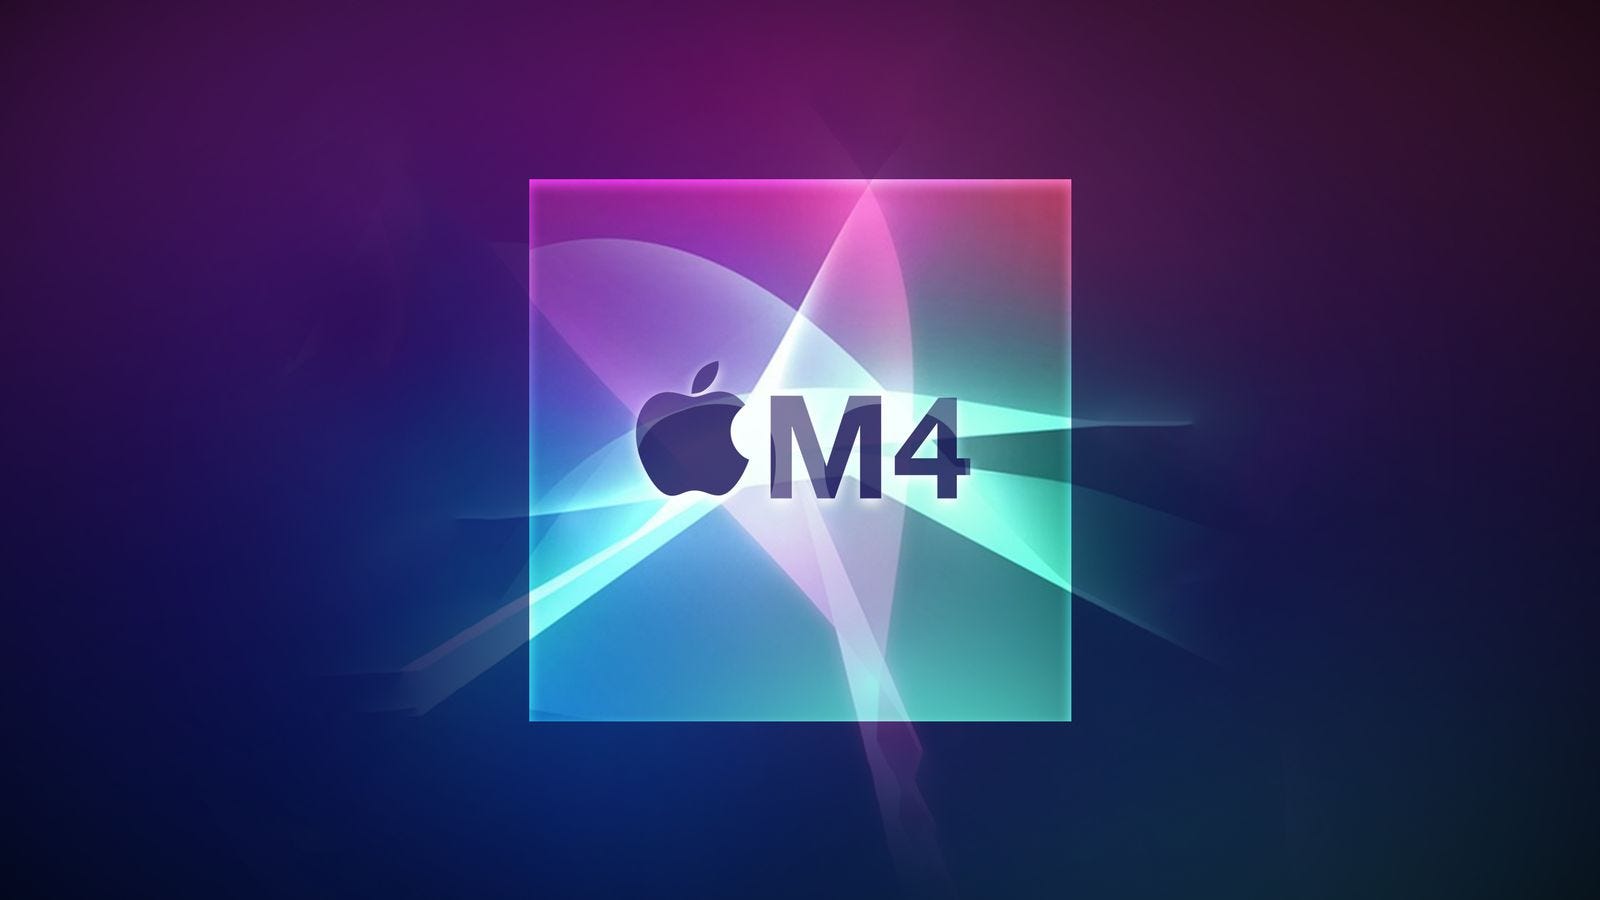 Apple is reportedly developing its first in-house AI processor, the M4 chip